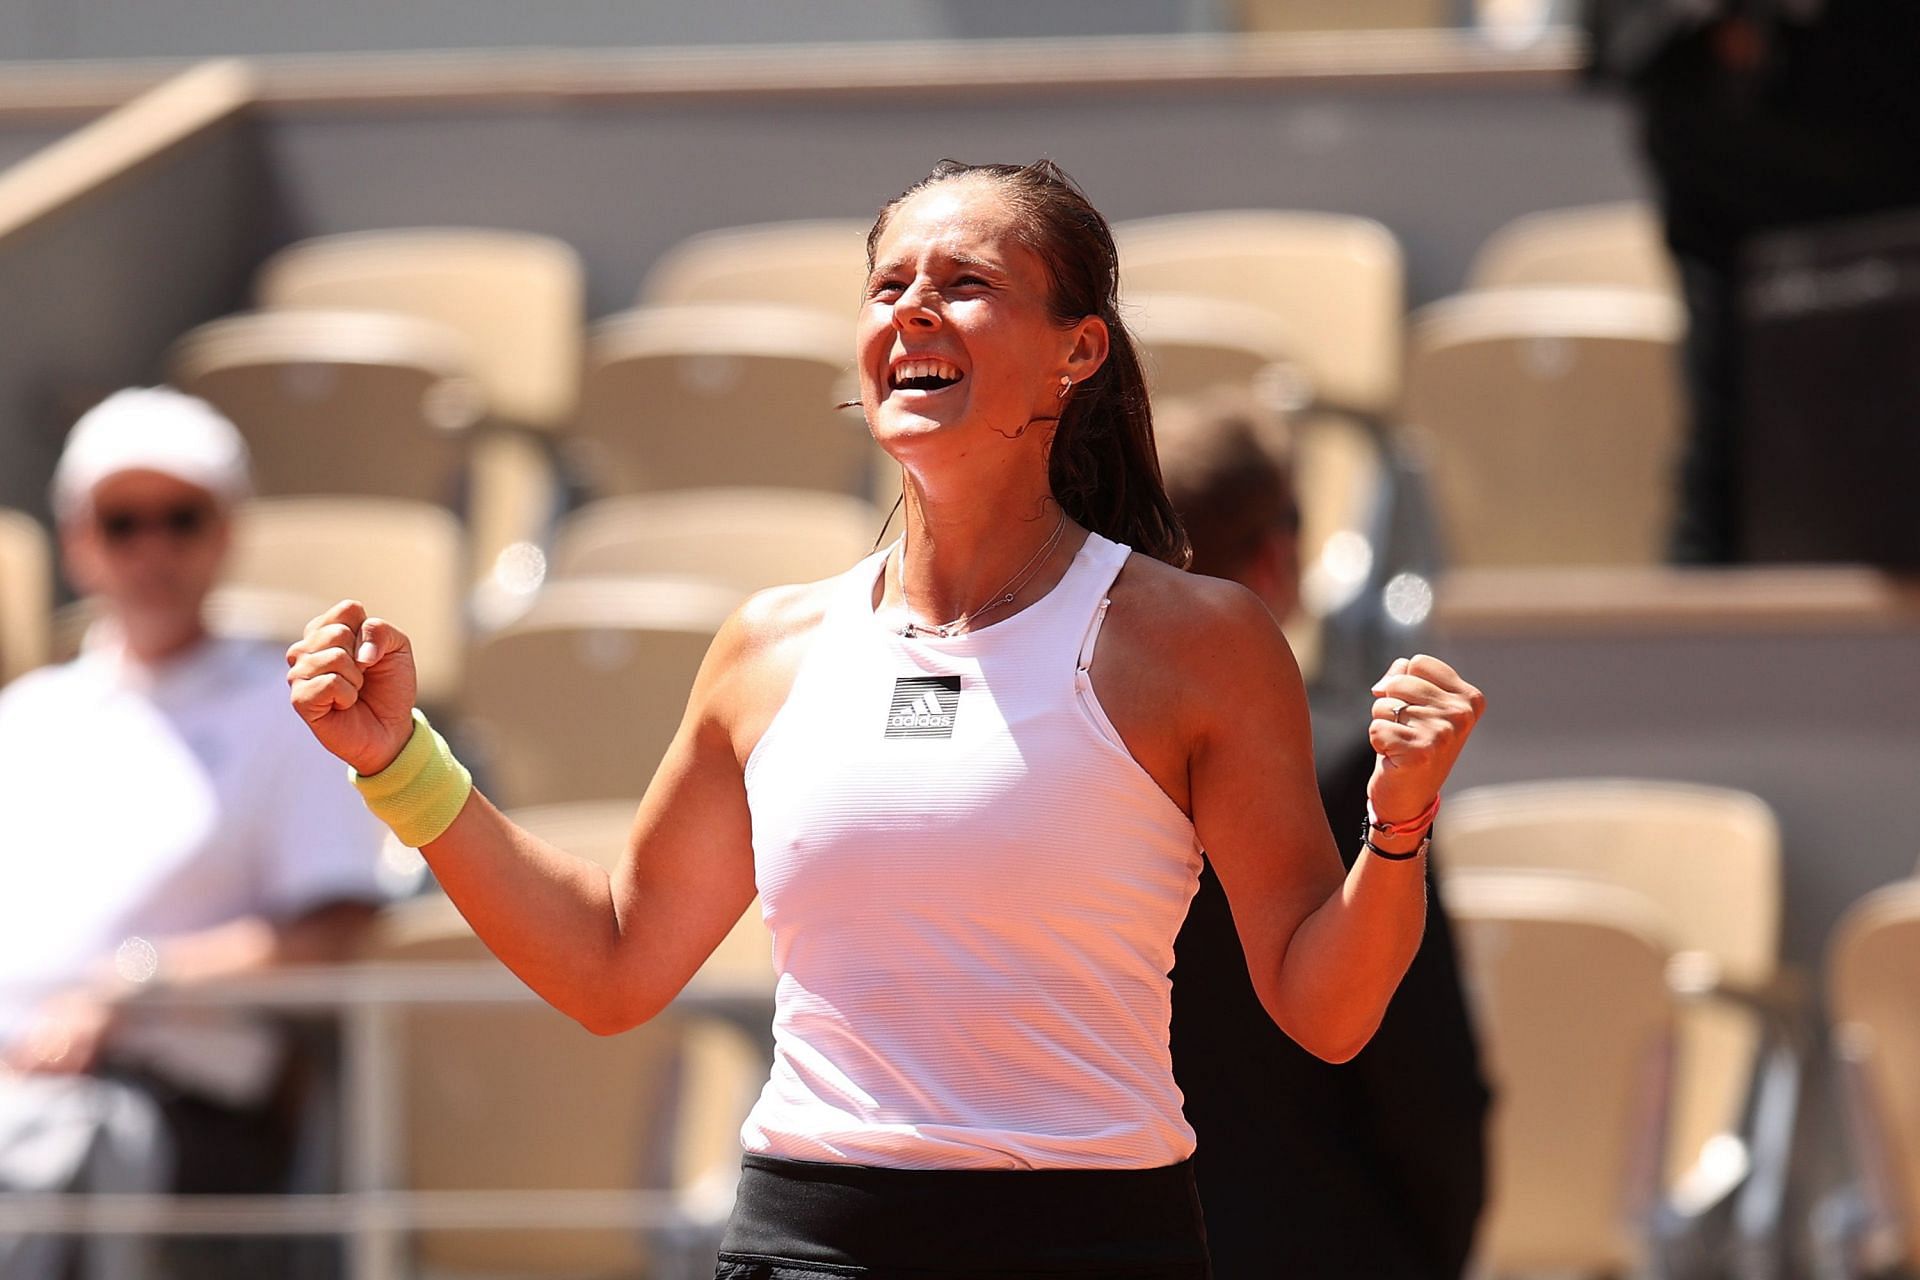 Daria Kasatkina has qualified for the Finals for the first time